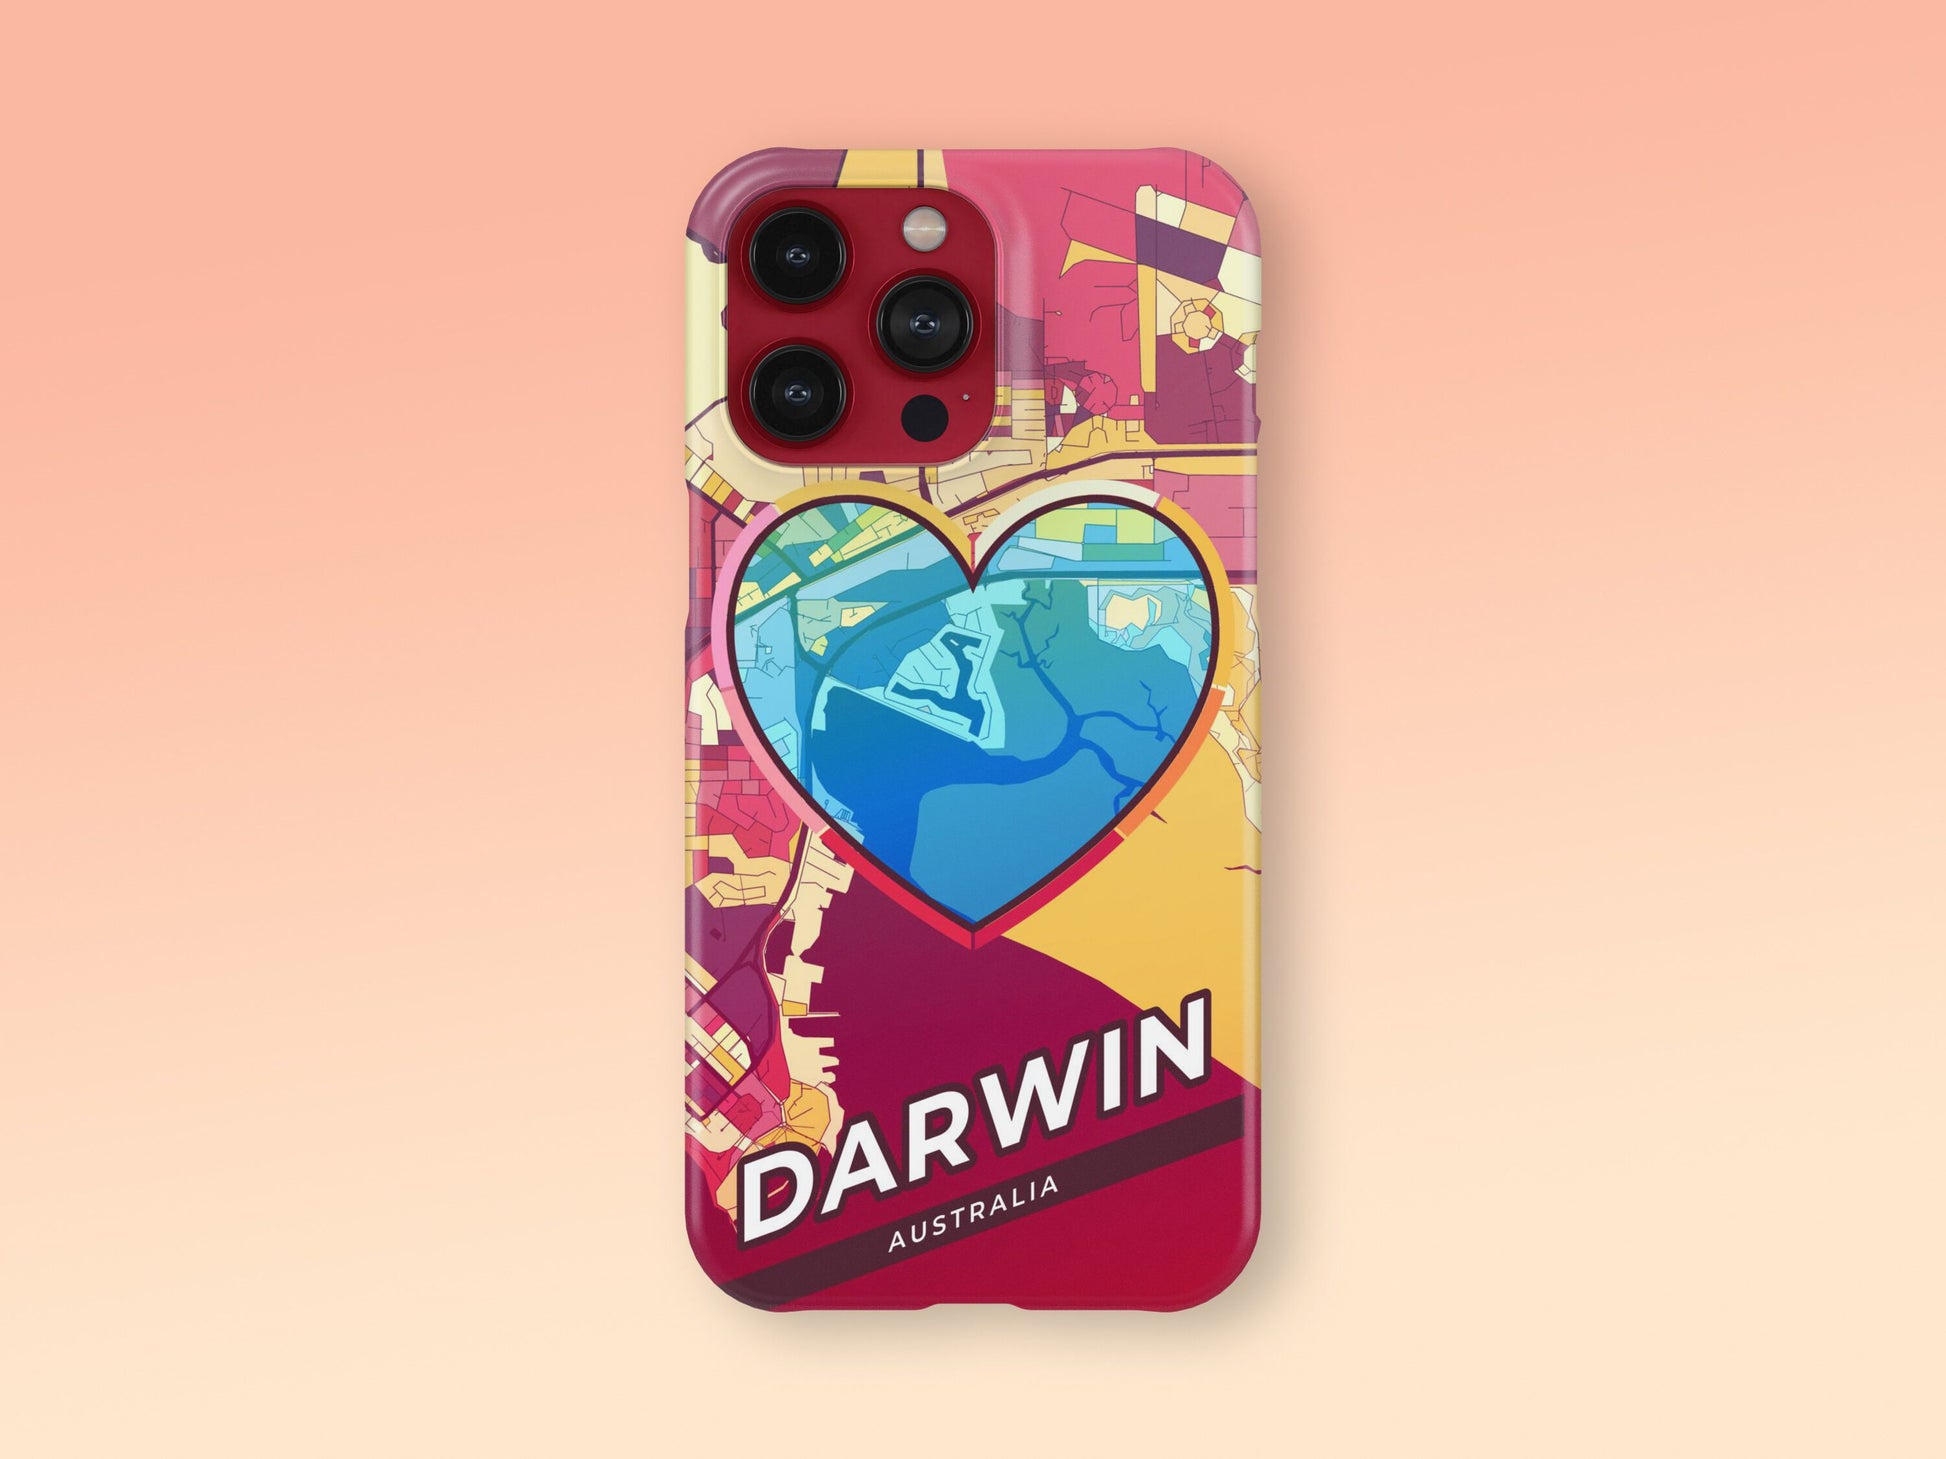 Darwin Australia slim phone case with colorful icon. Birthday, wedding or housewarming gift. Couple match cases. 2